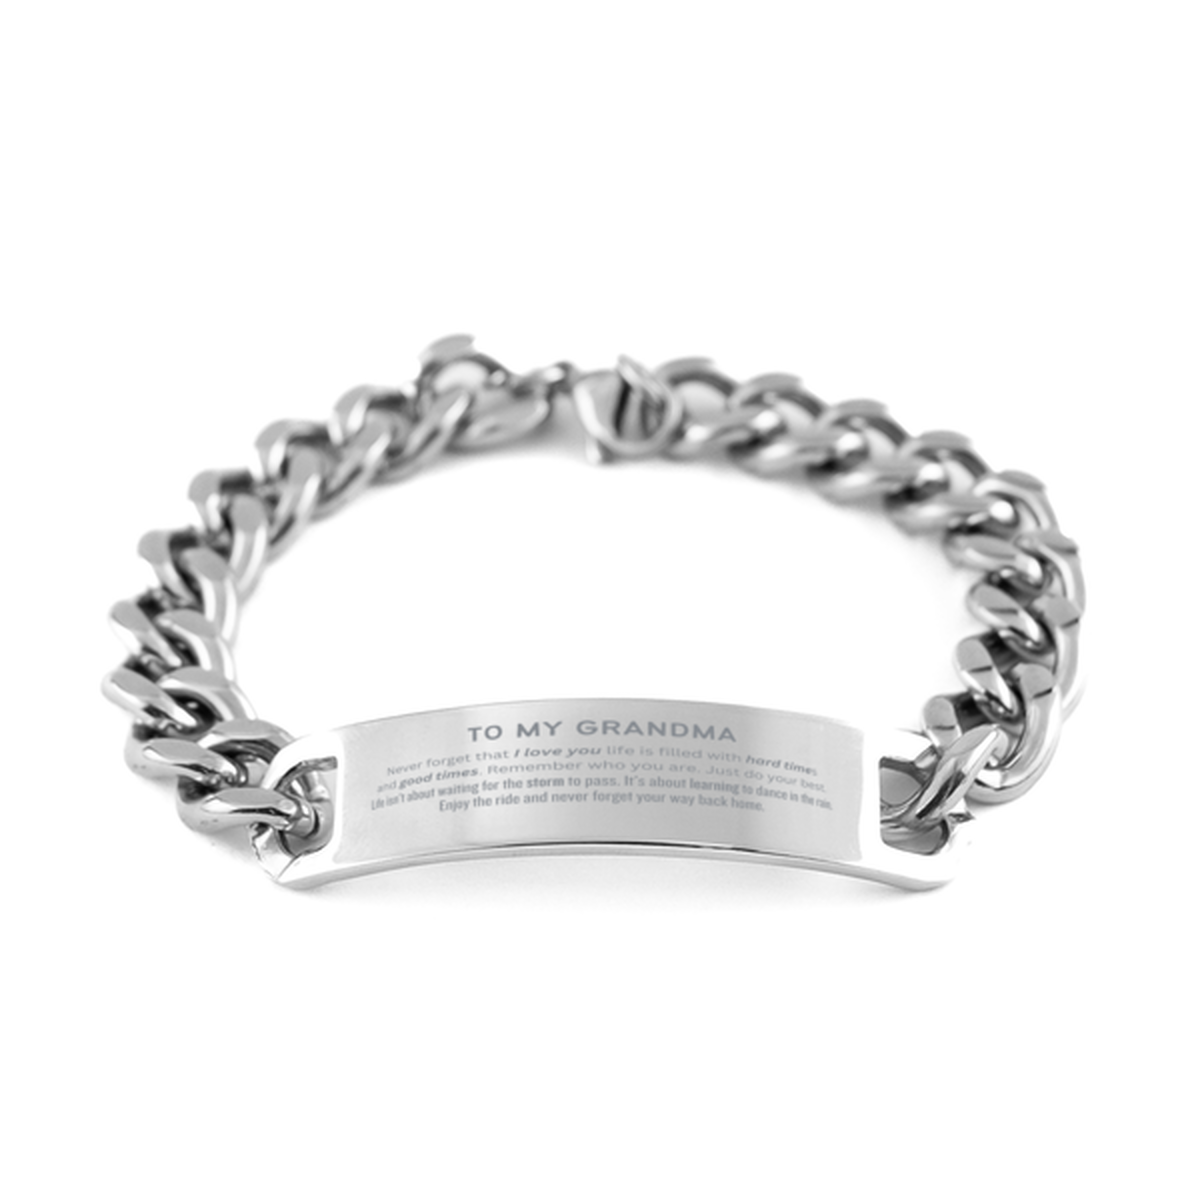 Christmas Grandma Cuban Chain Stainless Steel Bracelet Gifts, To My Grandma Birthday Thank You Gifts For Grandma, Graduation Unique Gifts For Grandma To My Grandma Never forget that I love you life is filled with hard times and good times. Remember who yo